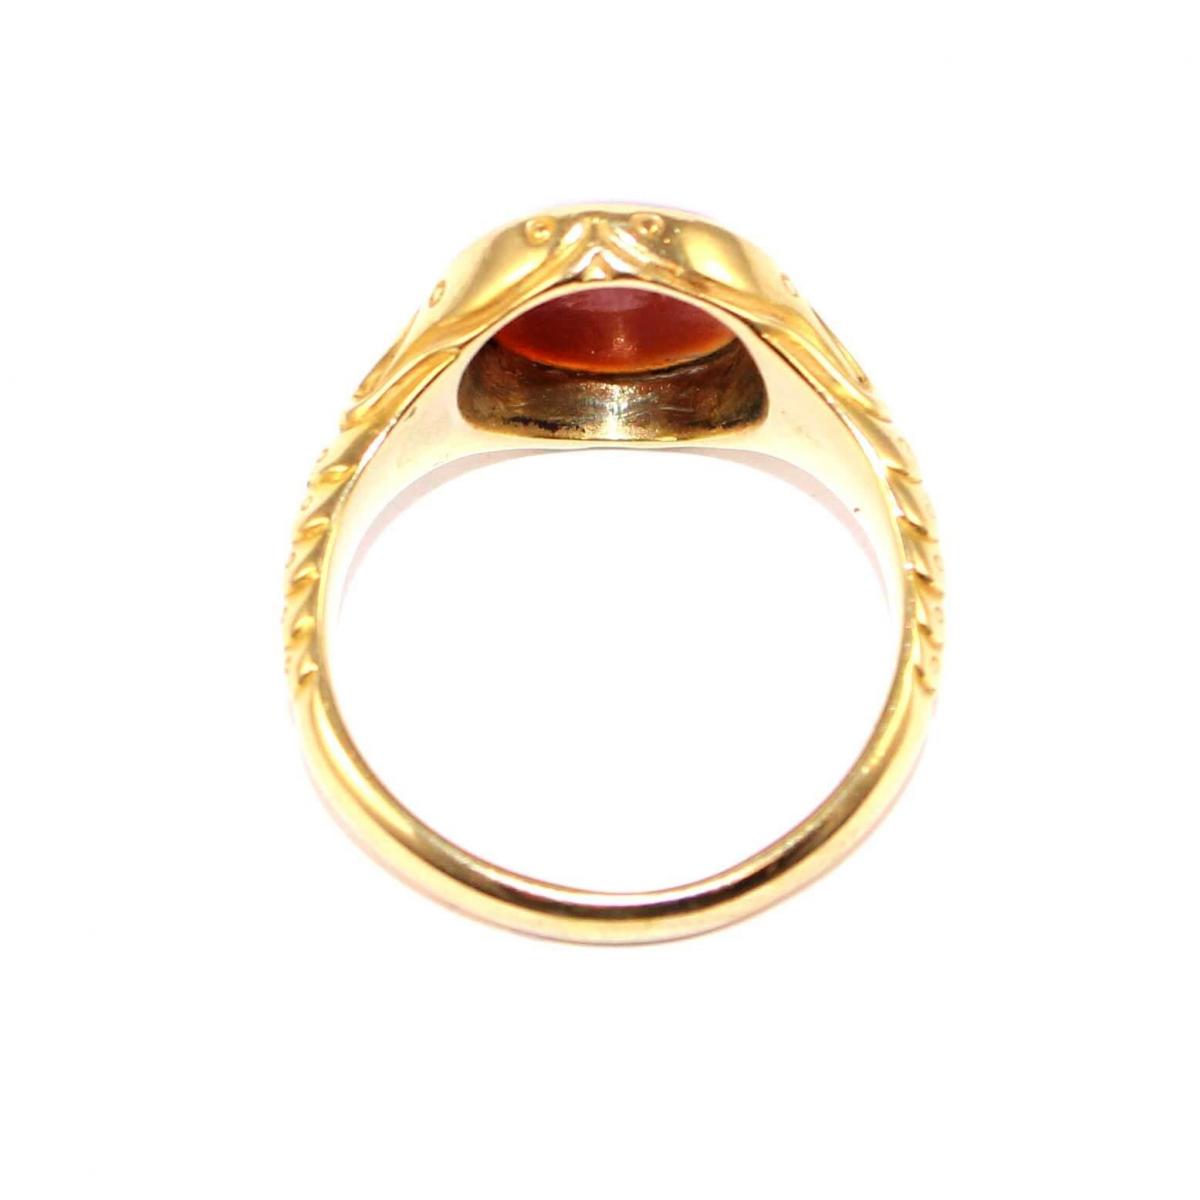 Late Victorian Banded Carnelian Signet Ring circa 1900